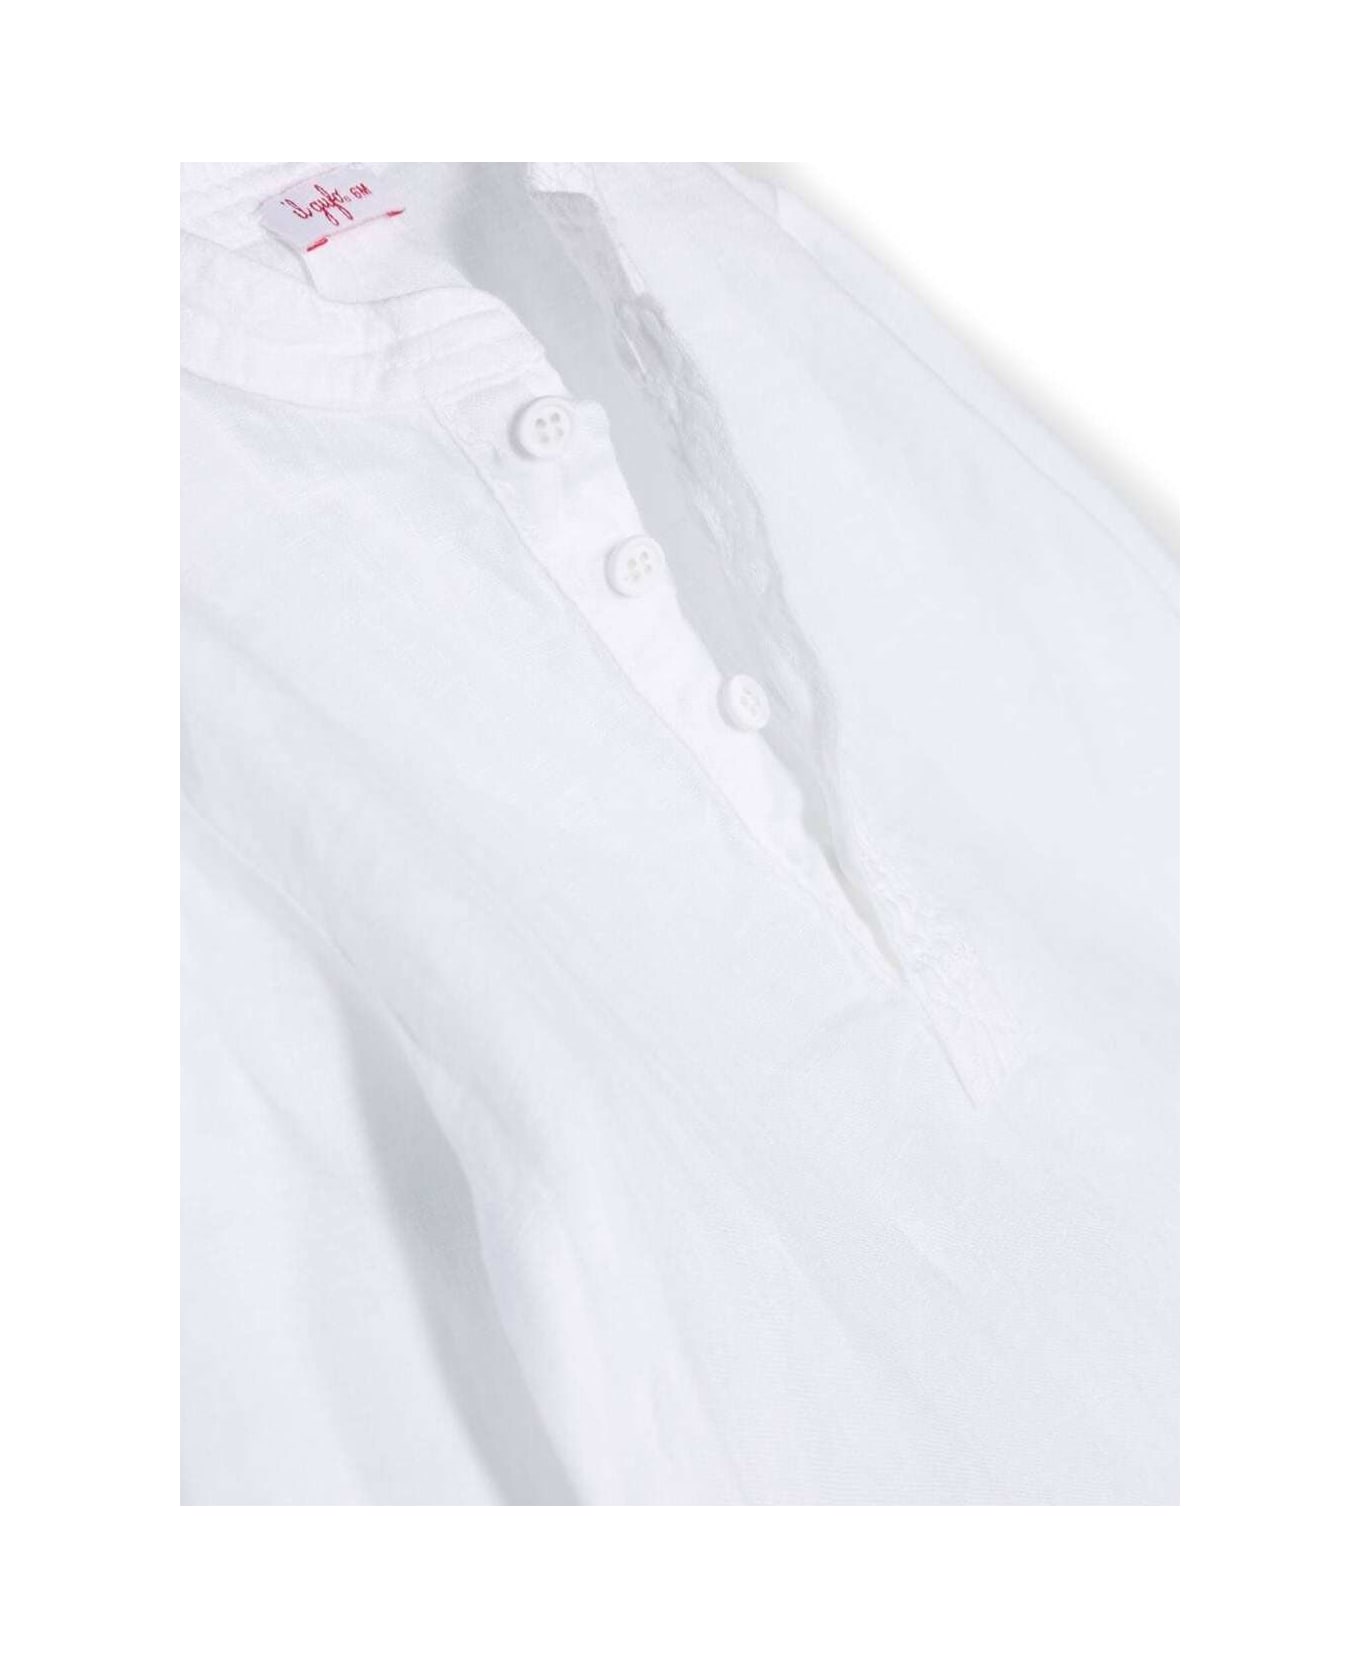 Il Gufo White Long Sleeve Shirt In Linen Baby - White